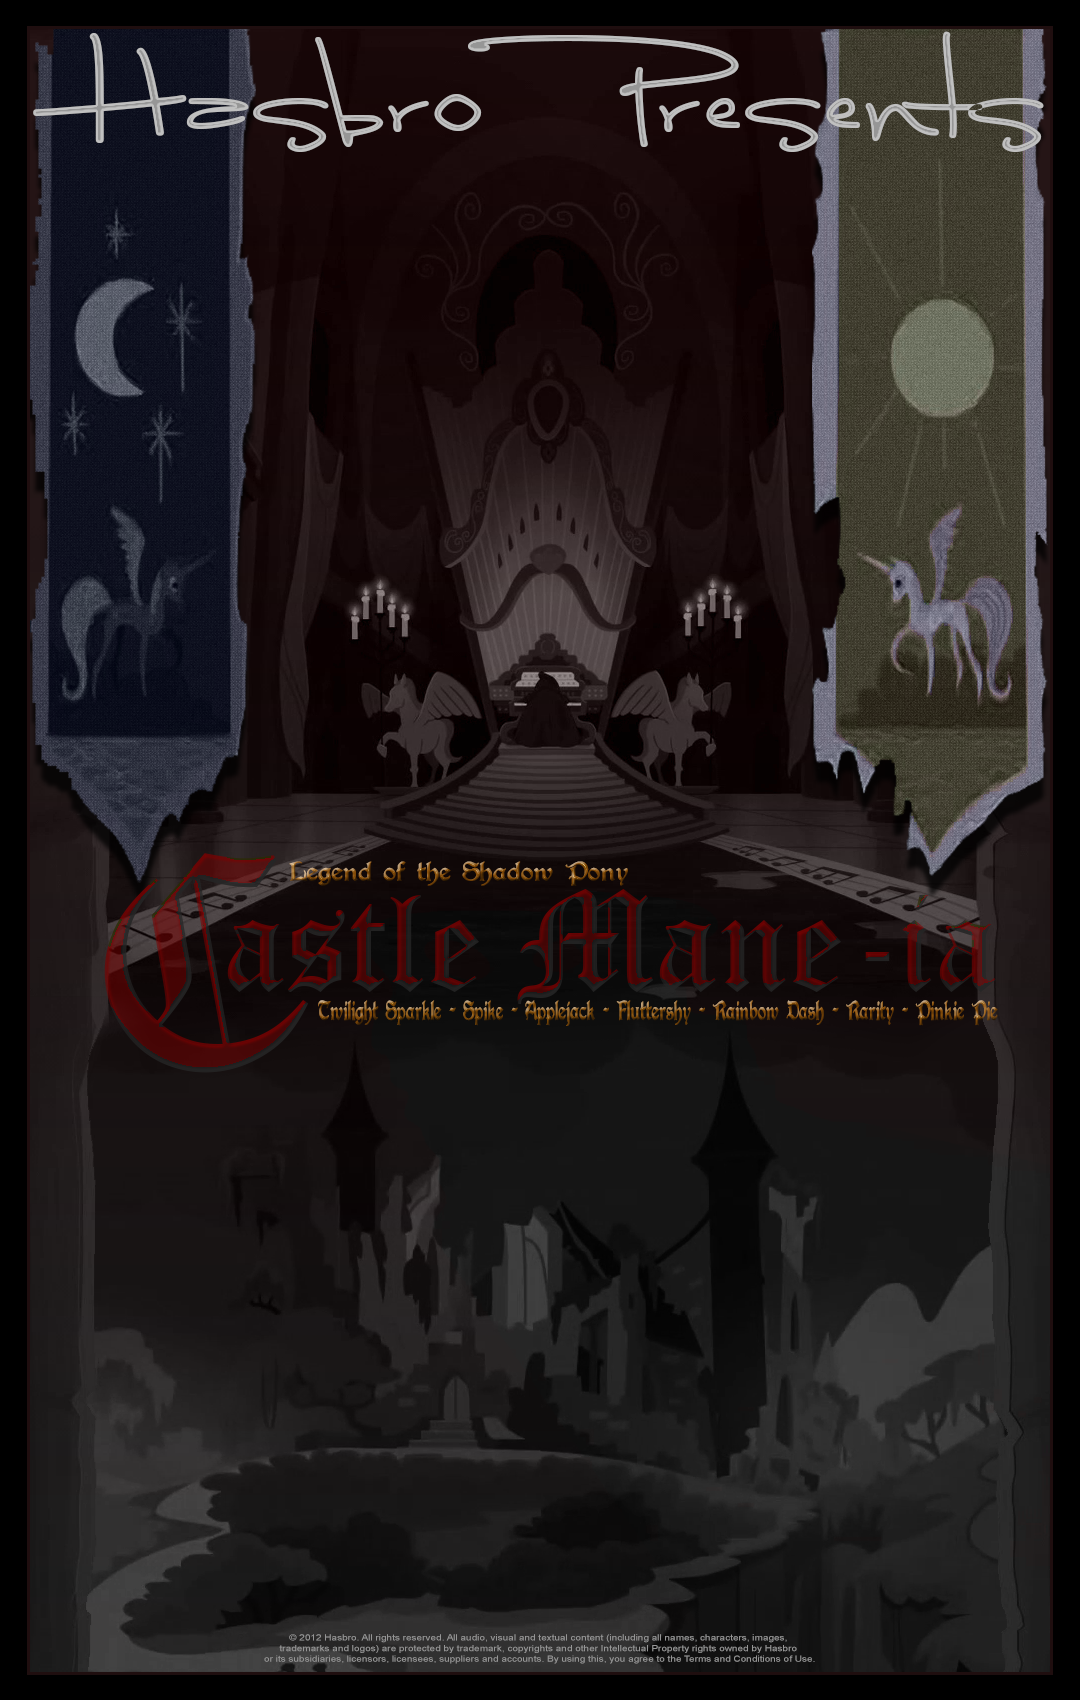 mlp___castle_mane_ia___movie_poster_by_pims1978-d6w9t1z.png